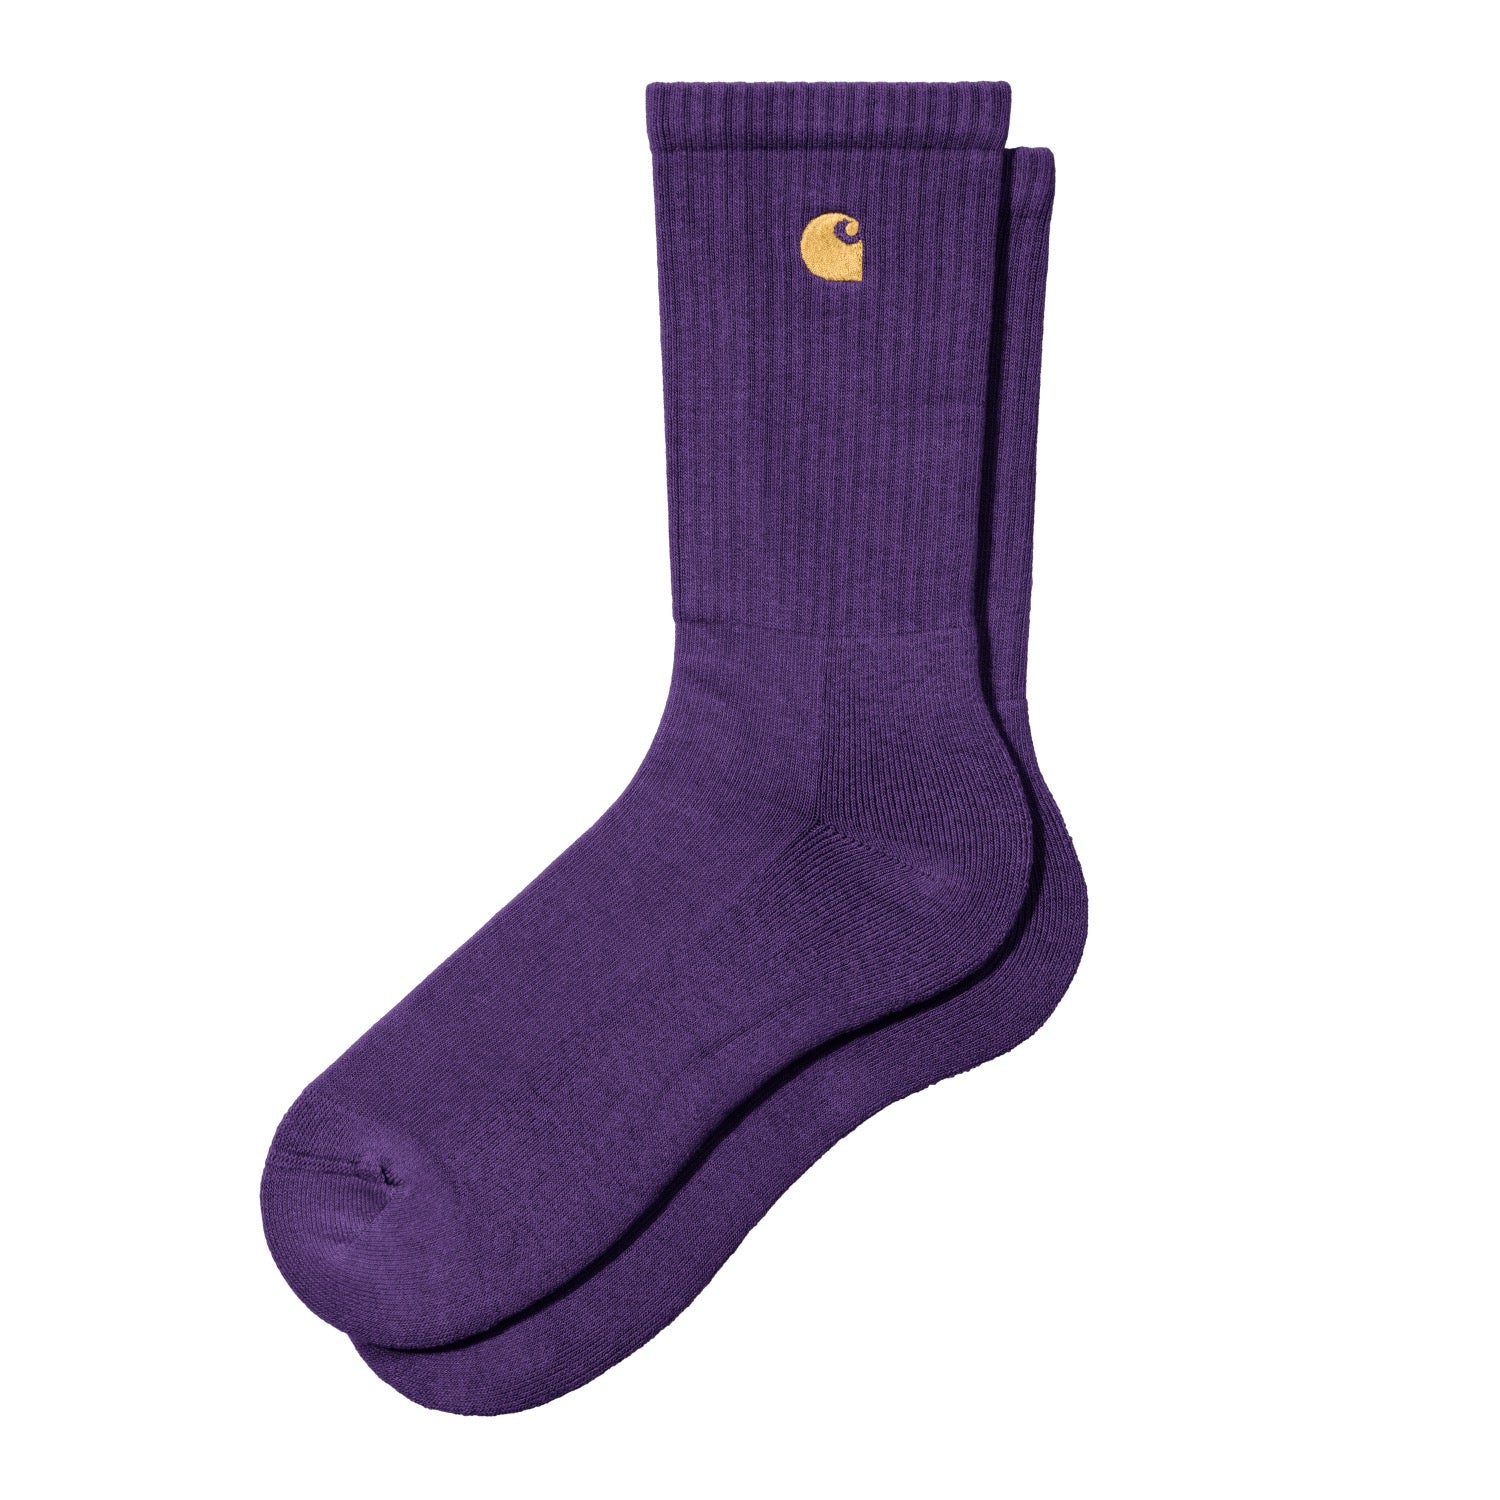 CHASE SOCKS - Tyrian / Gold